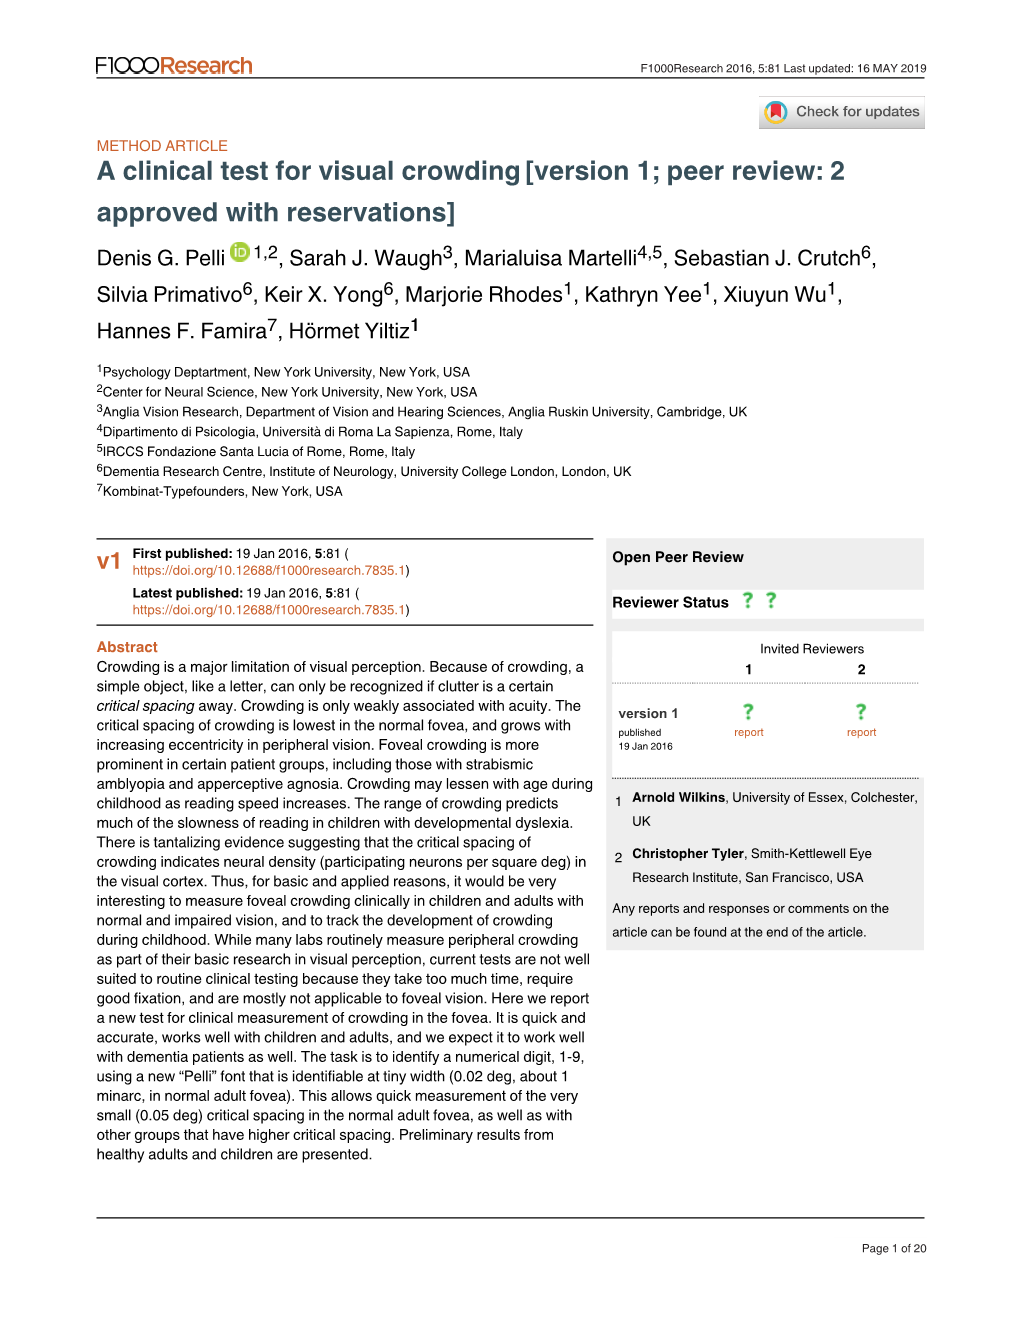 A Clinical Test for Visual Crowding[Version 1; Peer Review: 2